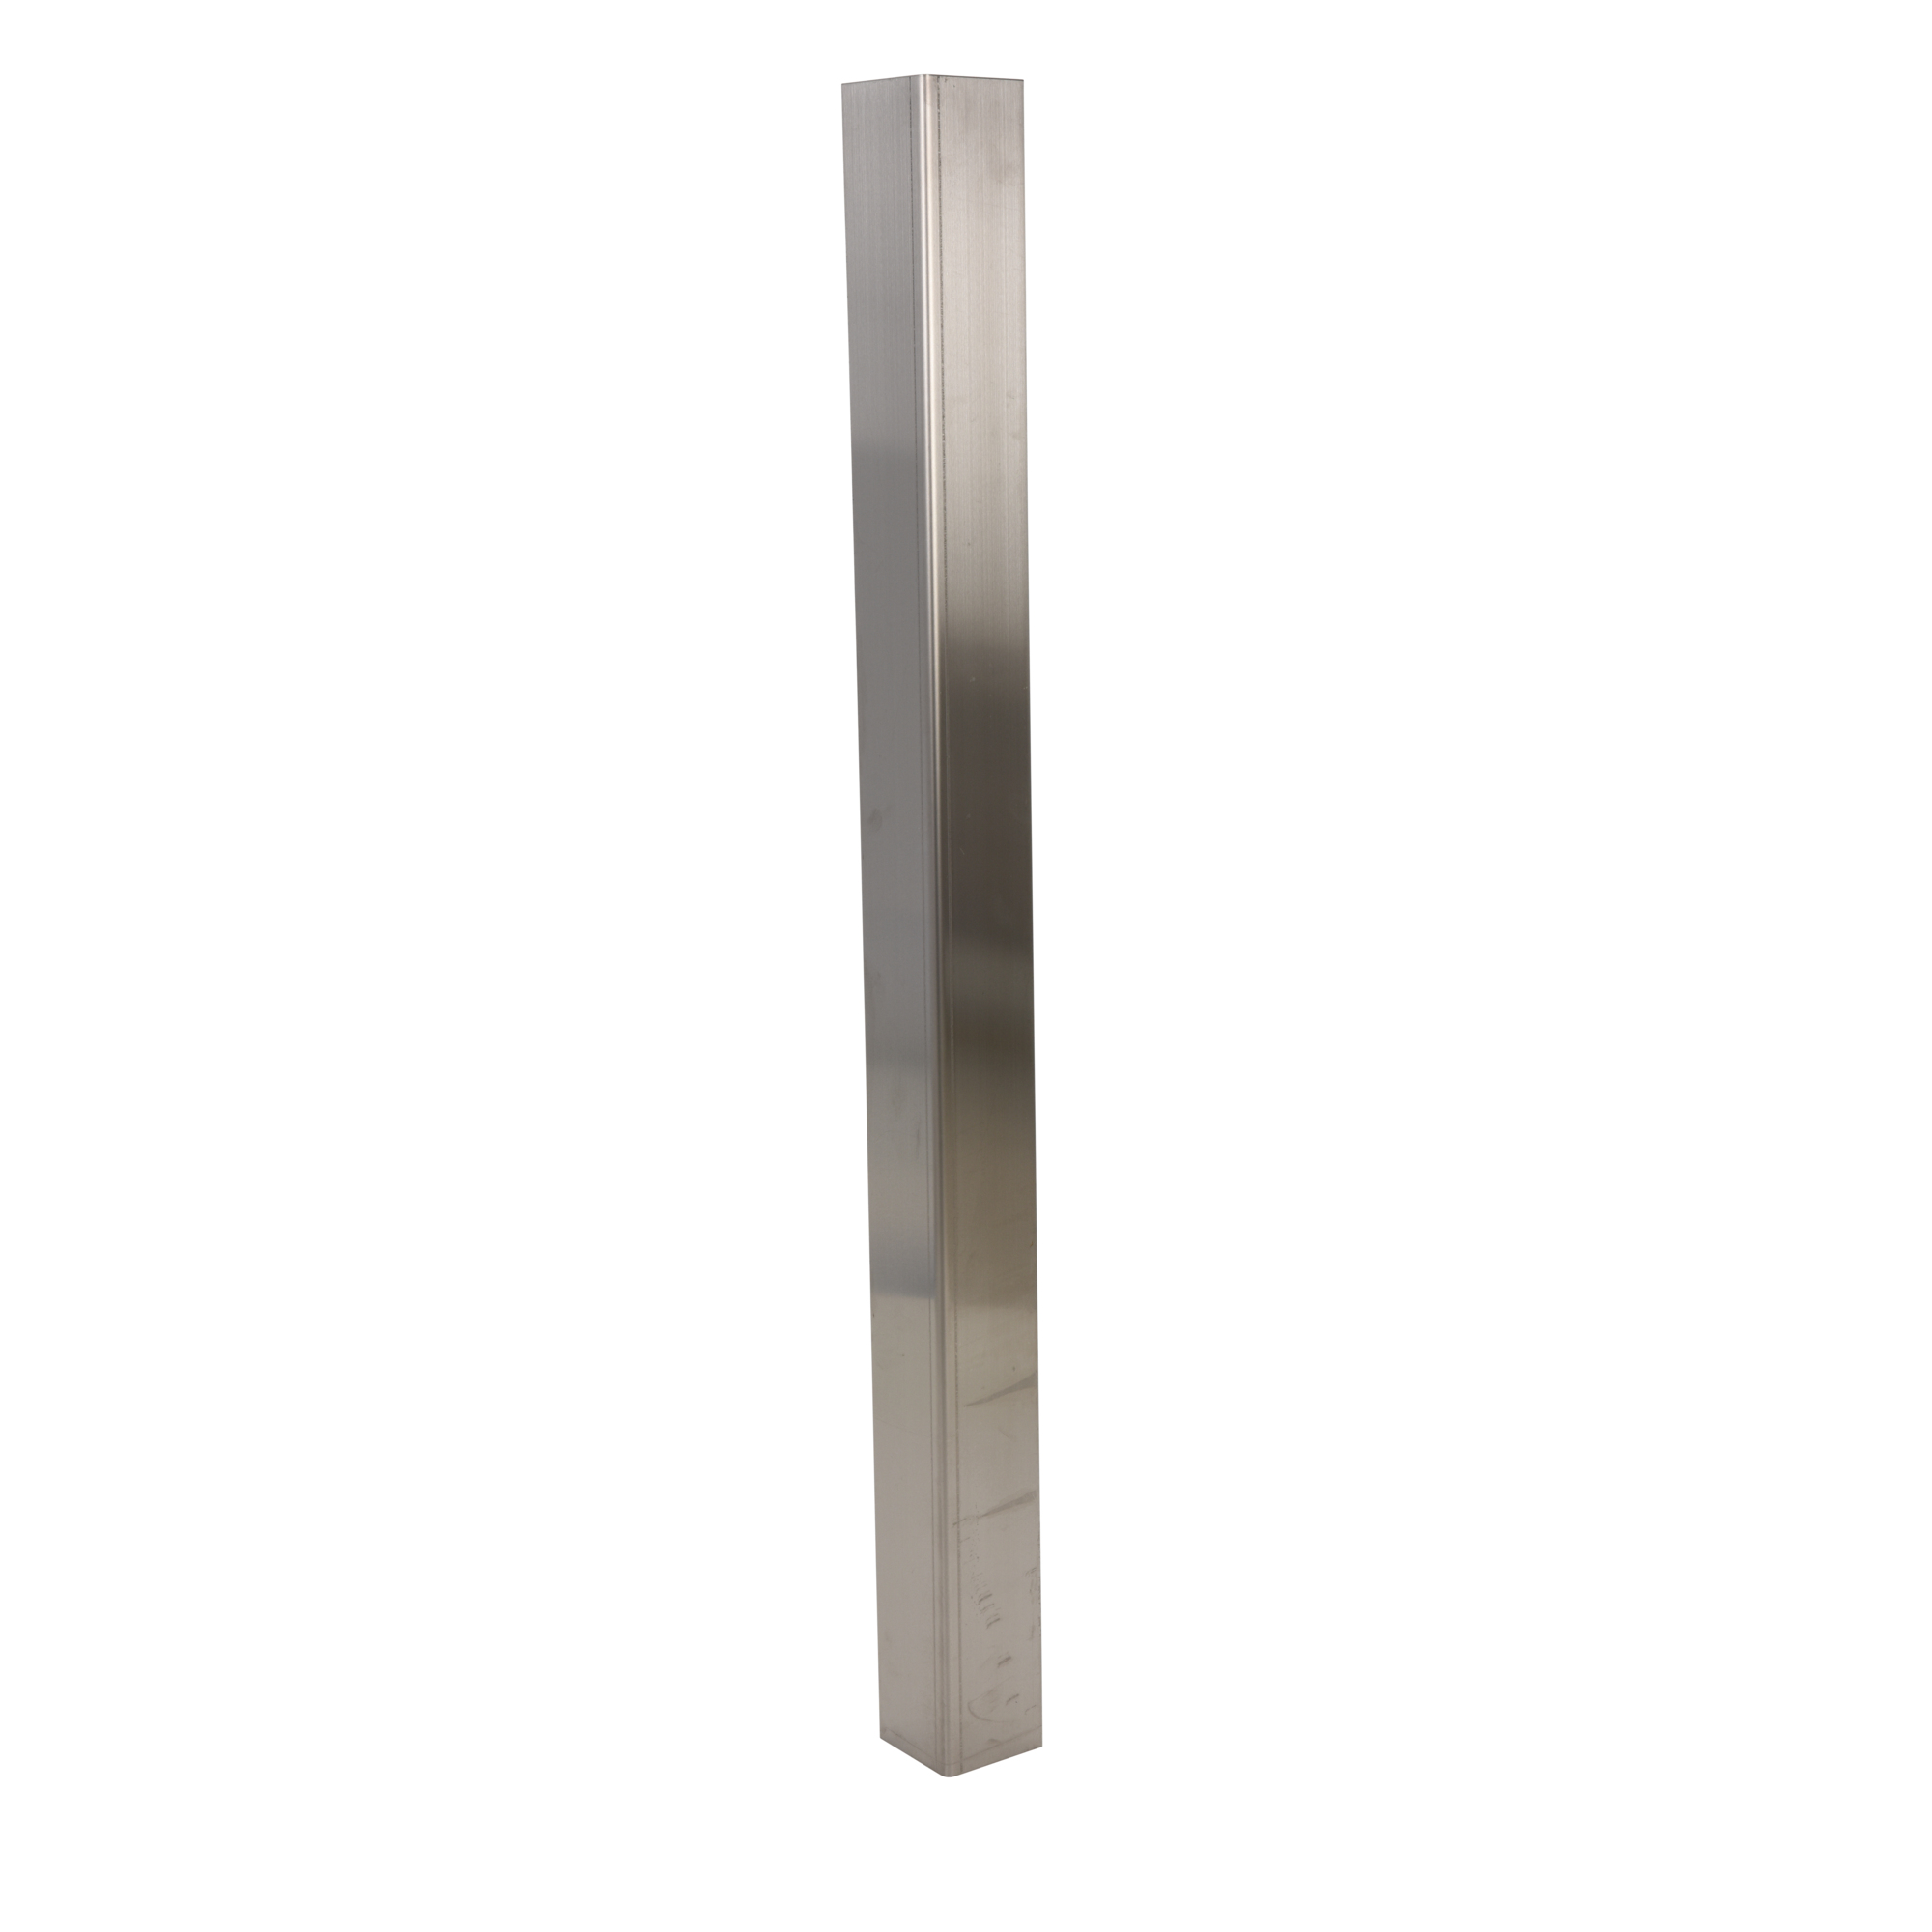 Vestil, 304 Stainless steel square corner guard 48Inch Height, Color Silver, Max. Width 3.5 in, Material Stainless Steel, Model SS-48